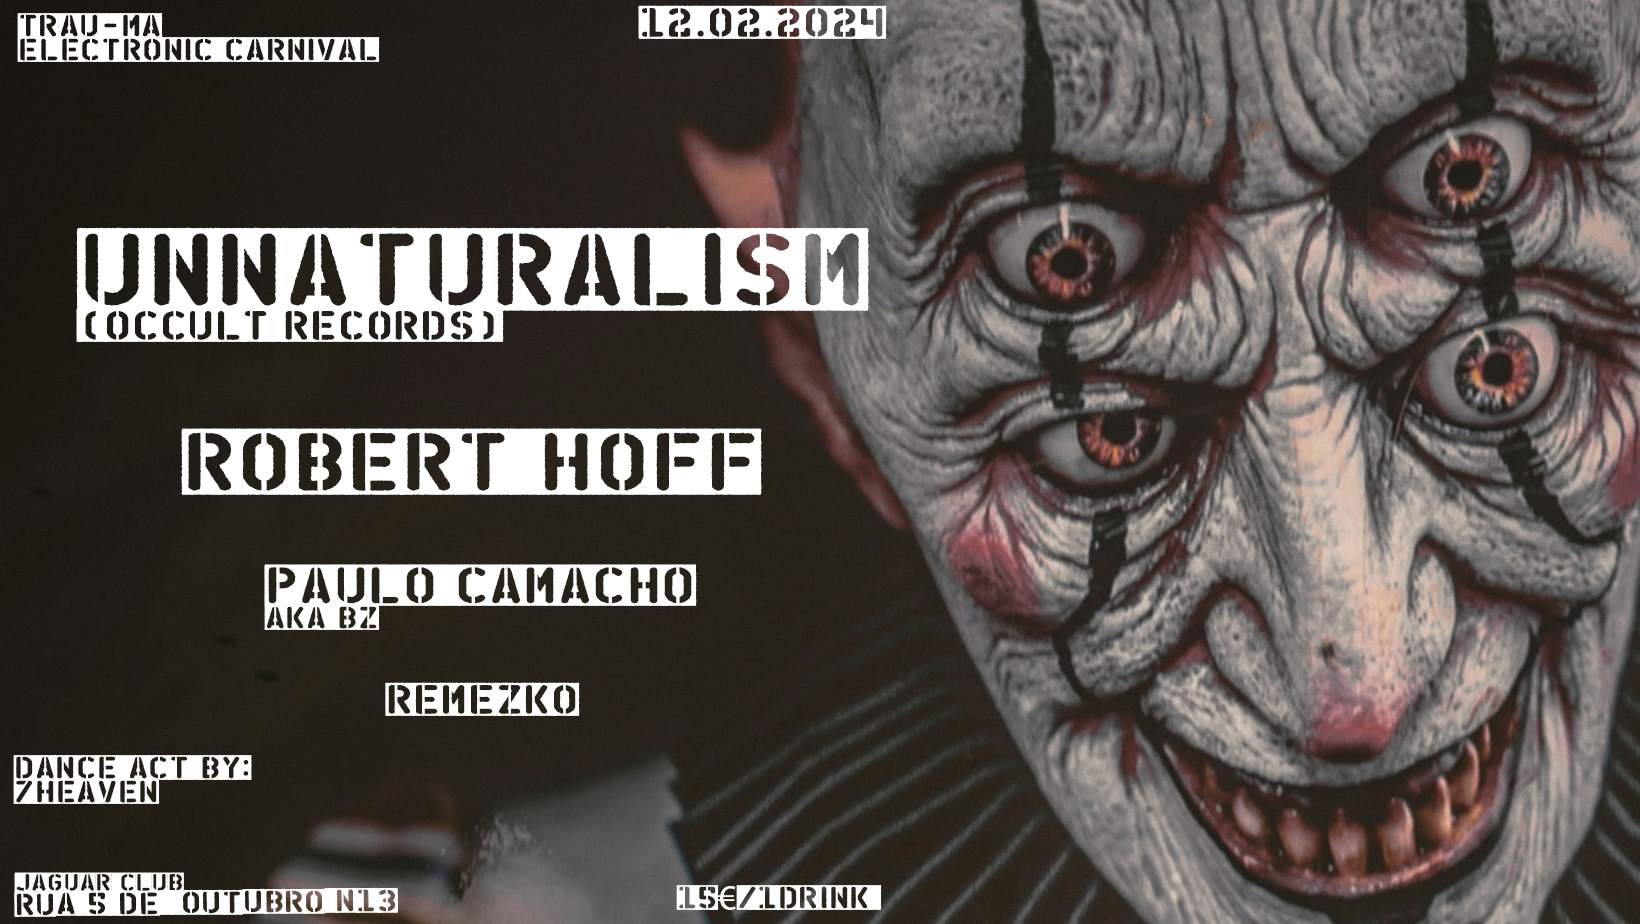 trau-ma: Electronic Carnival with UNNATURALISM - フライヤー表